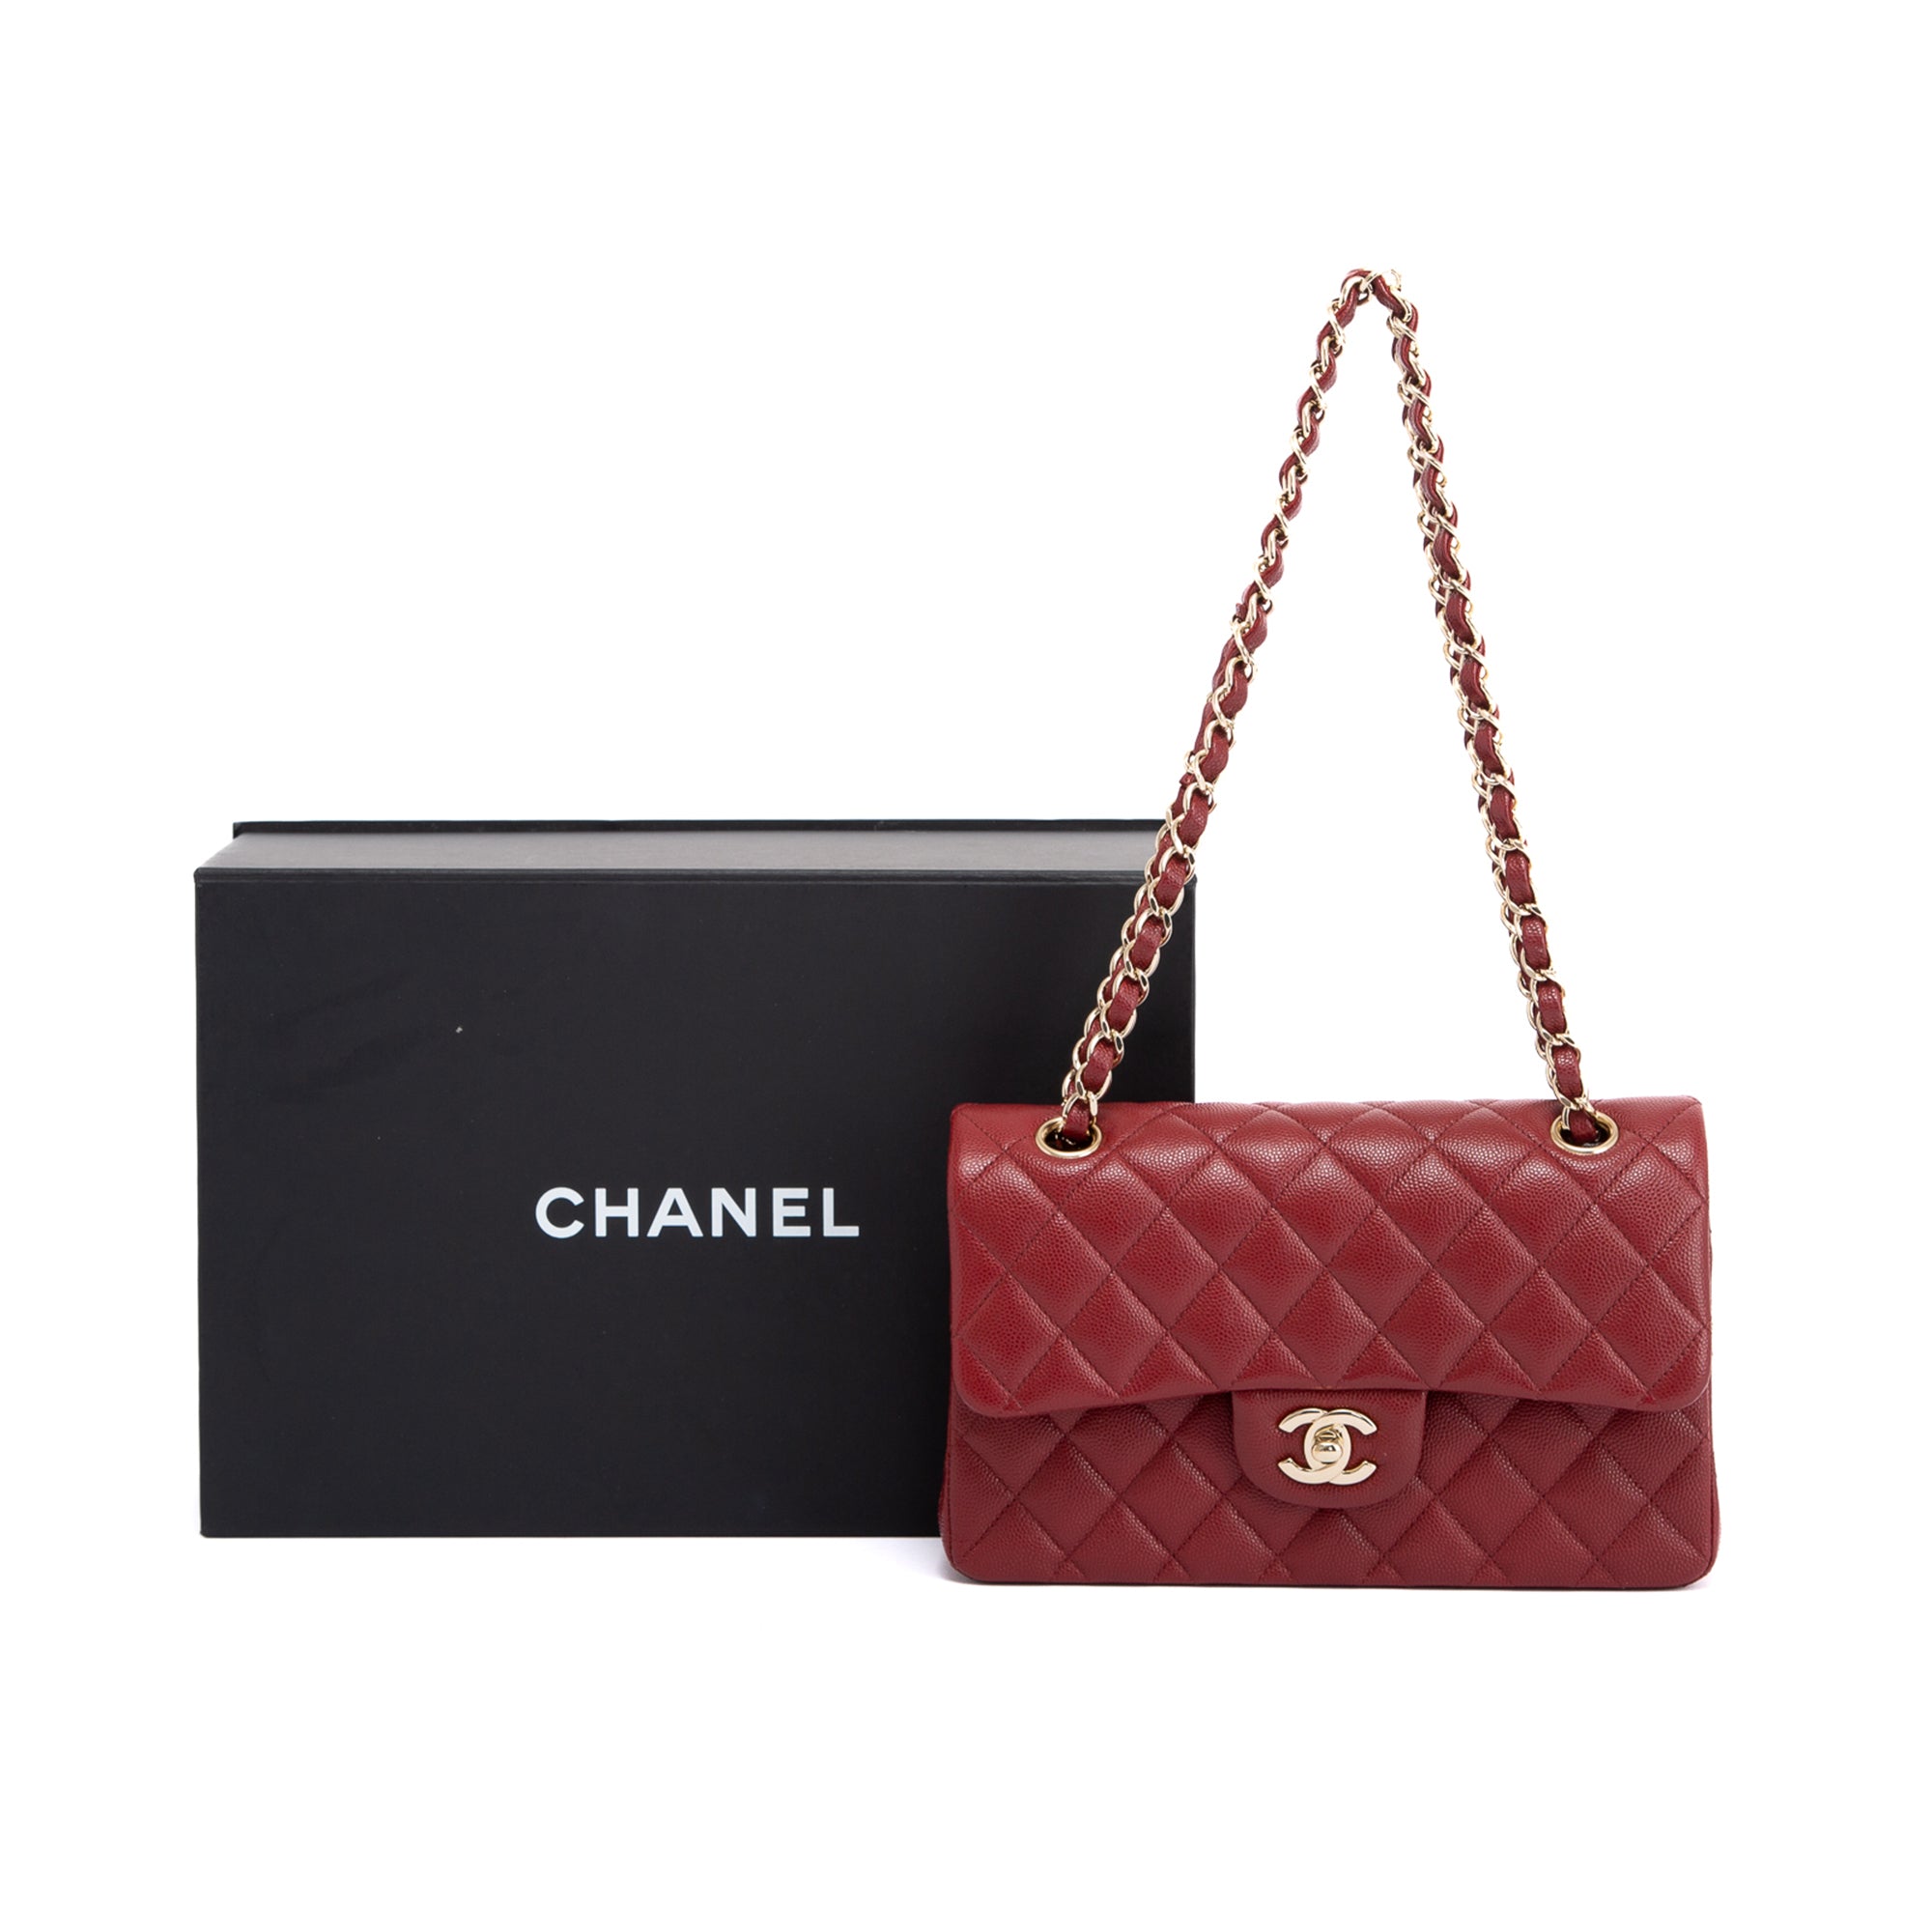 CHANEL Box Small Bags & Handbags for Women, Authenticity Guaranteed